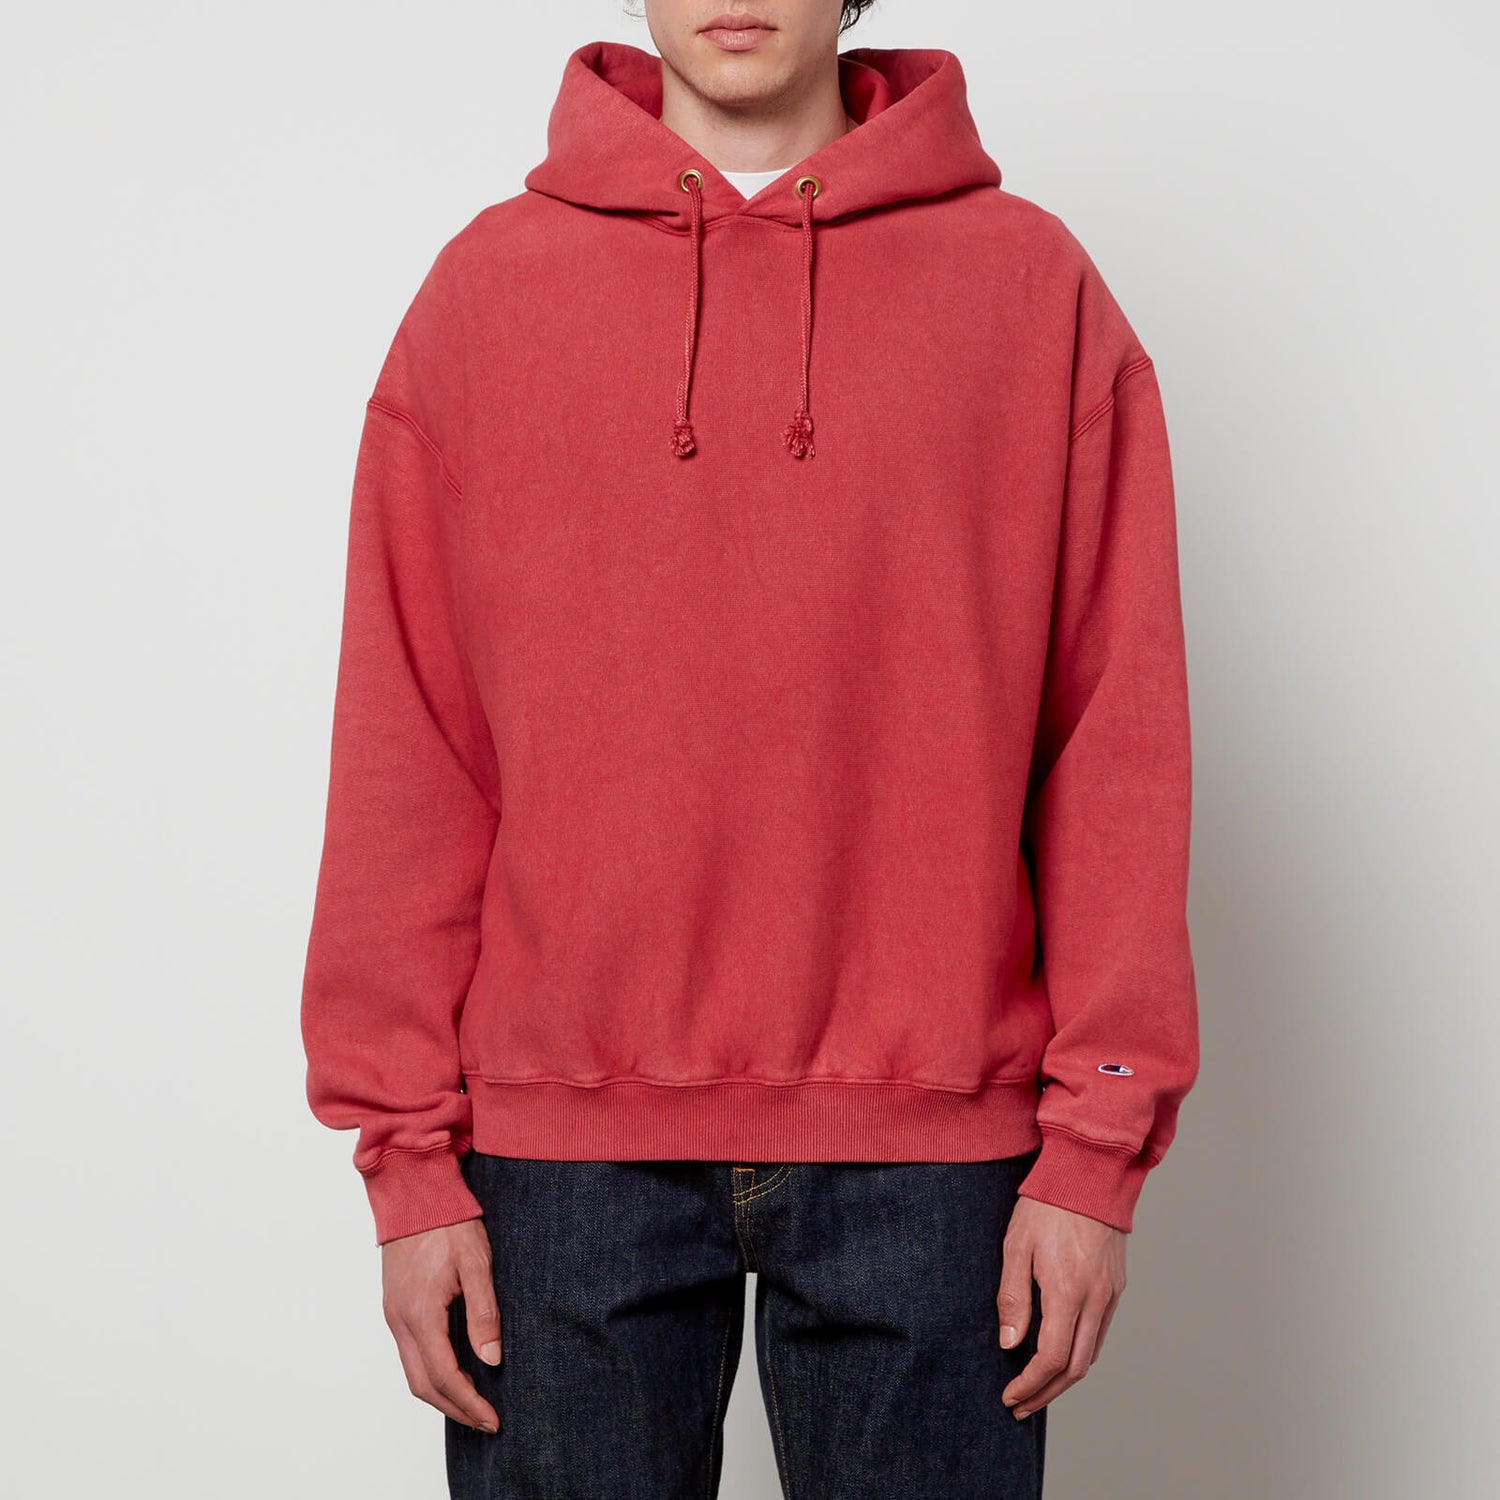 Champion Men's Garment Dyed Hoodie - Red - S